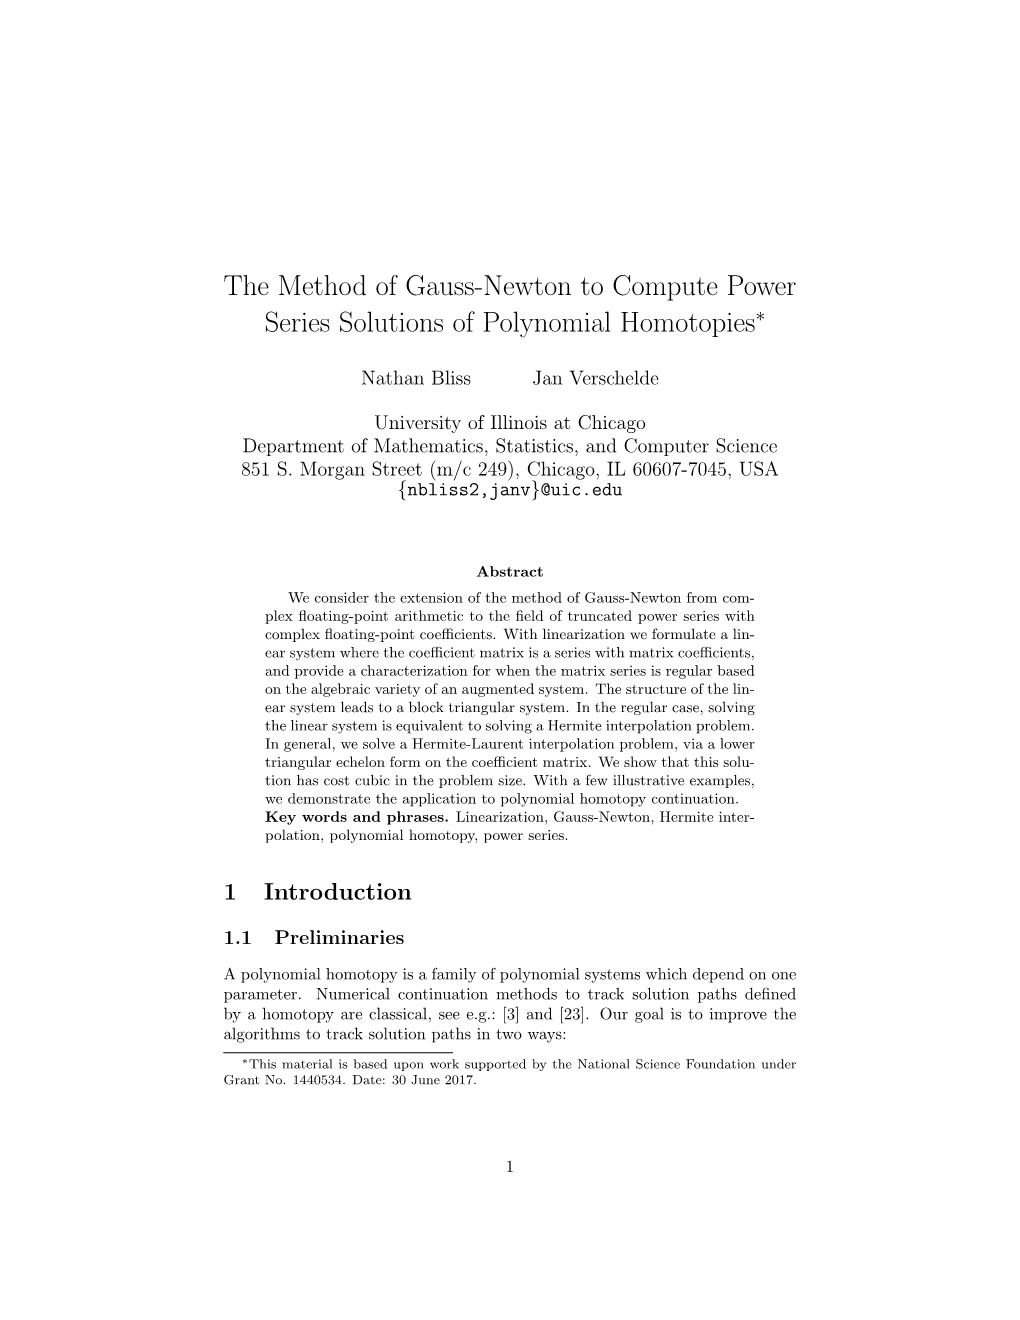 The Method of Gauss-Newton to Compute Power Series Solutions of Polynomial Homotopies∗